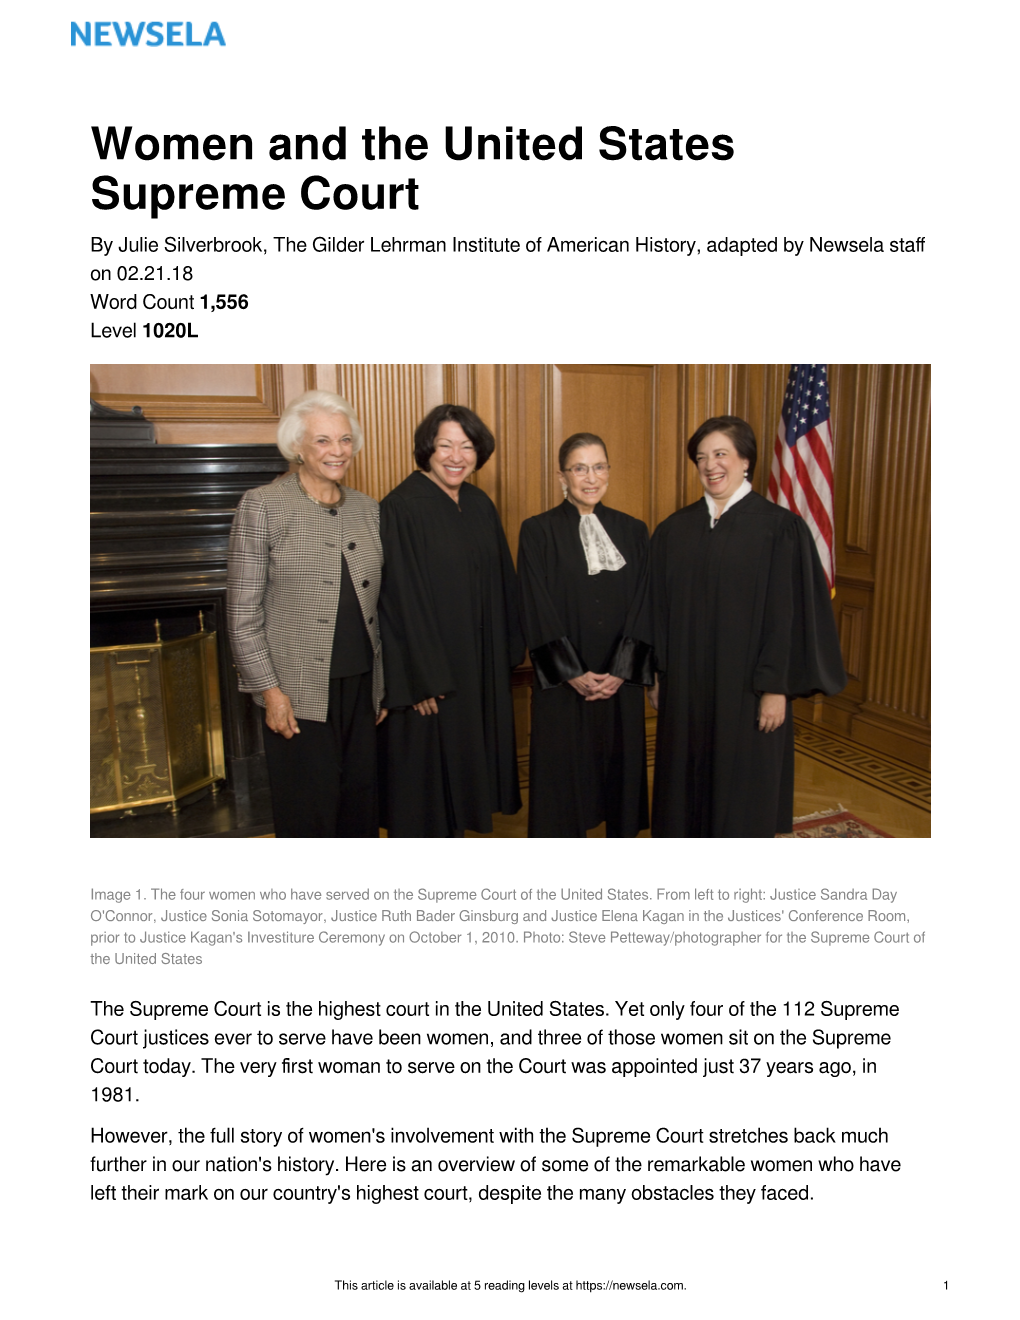 Women and the United States Supreme Court